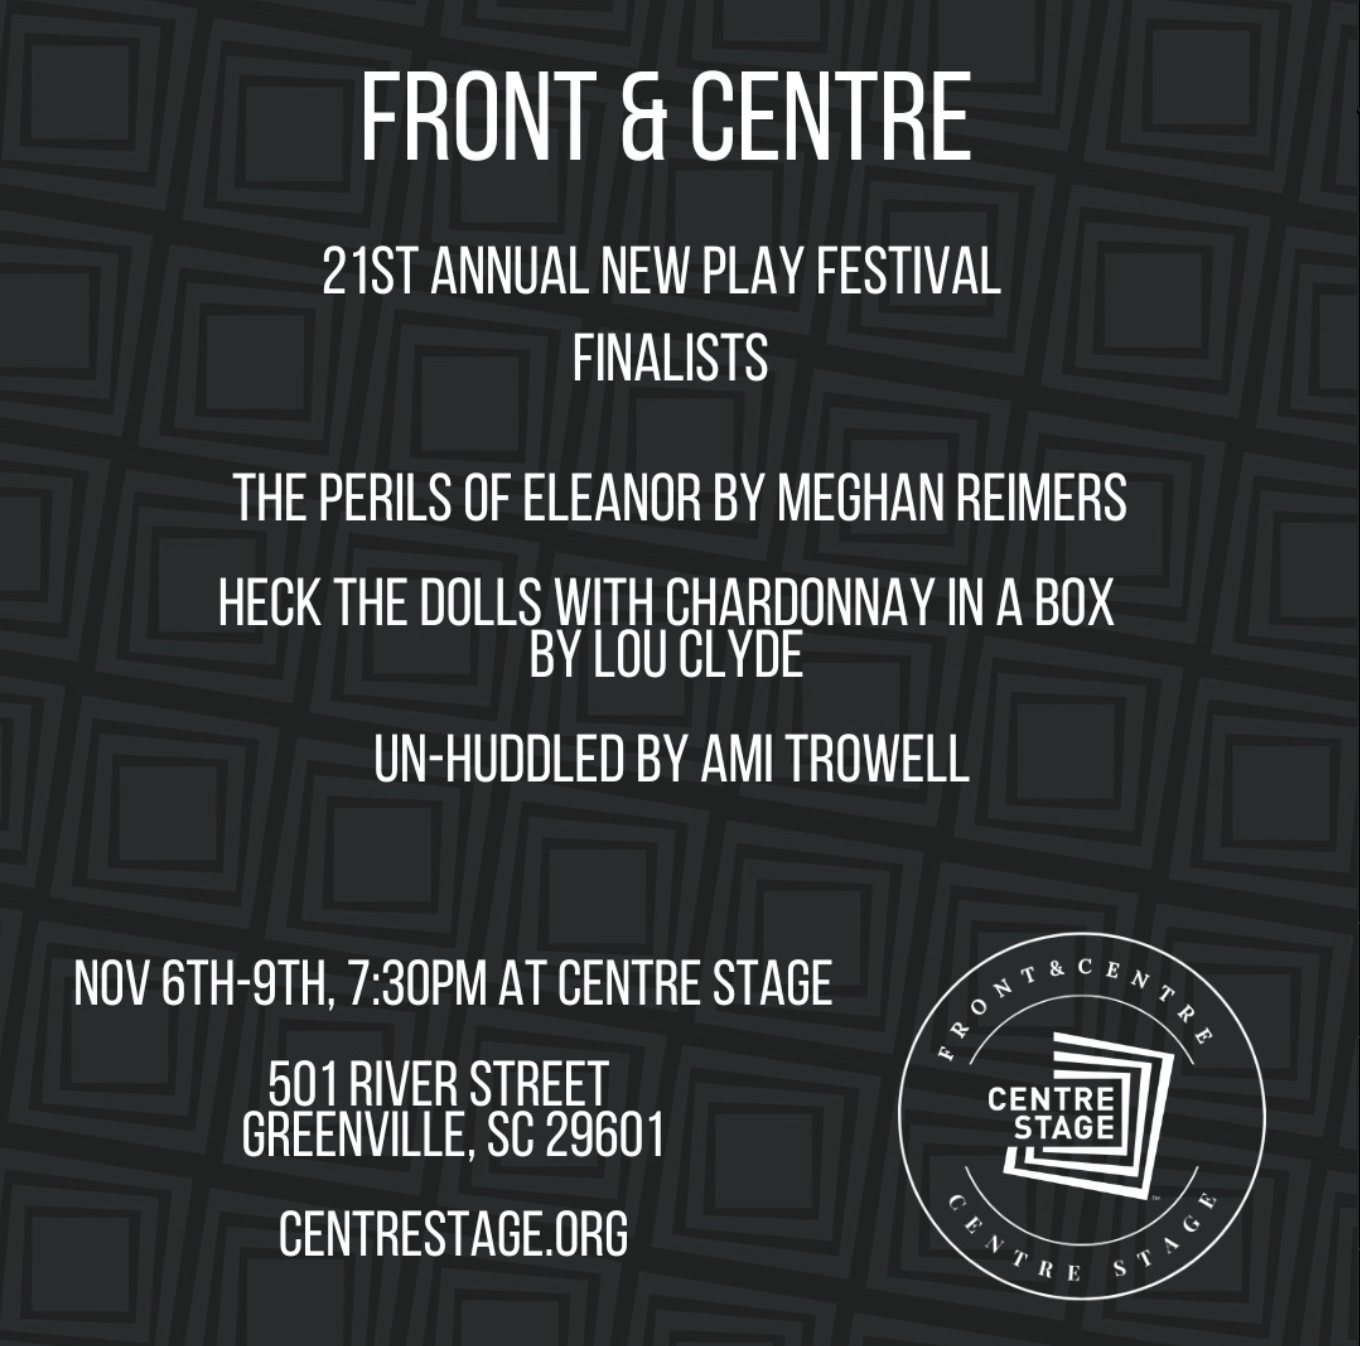 Image for The 21st Annual New Play Festival